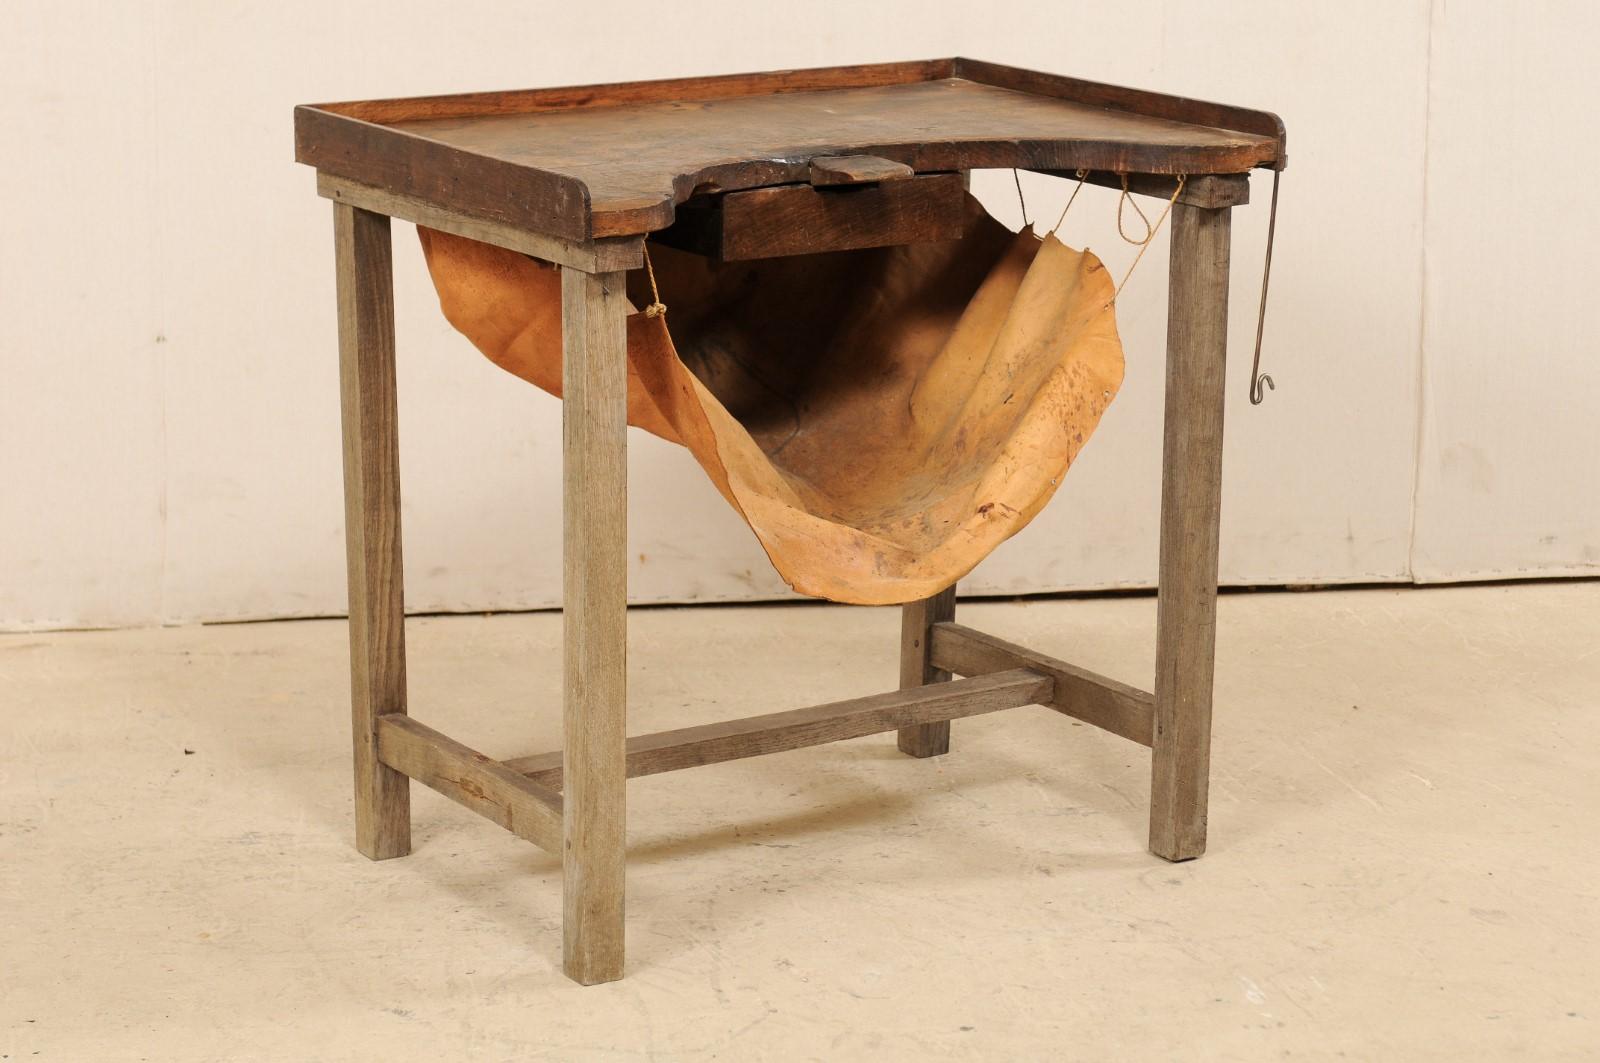 A French jeweler's work bench table from the early 19th century. This unusual French table was originally used during the early 19th century by a jewelry maker, as a work bench for designing. The table features a mostly rectangular-shaped top with